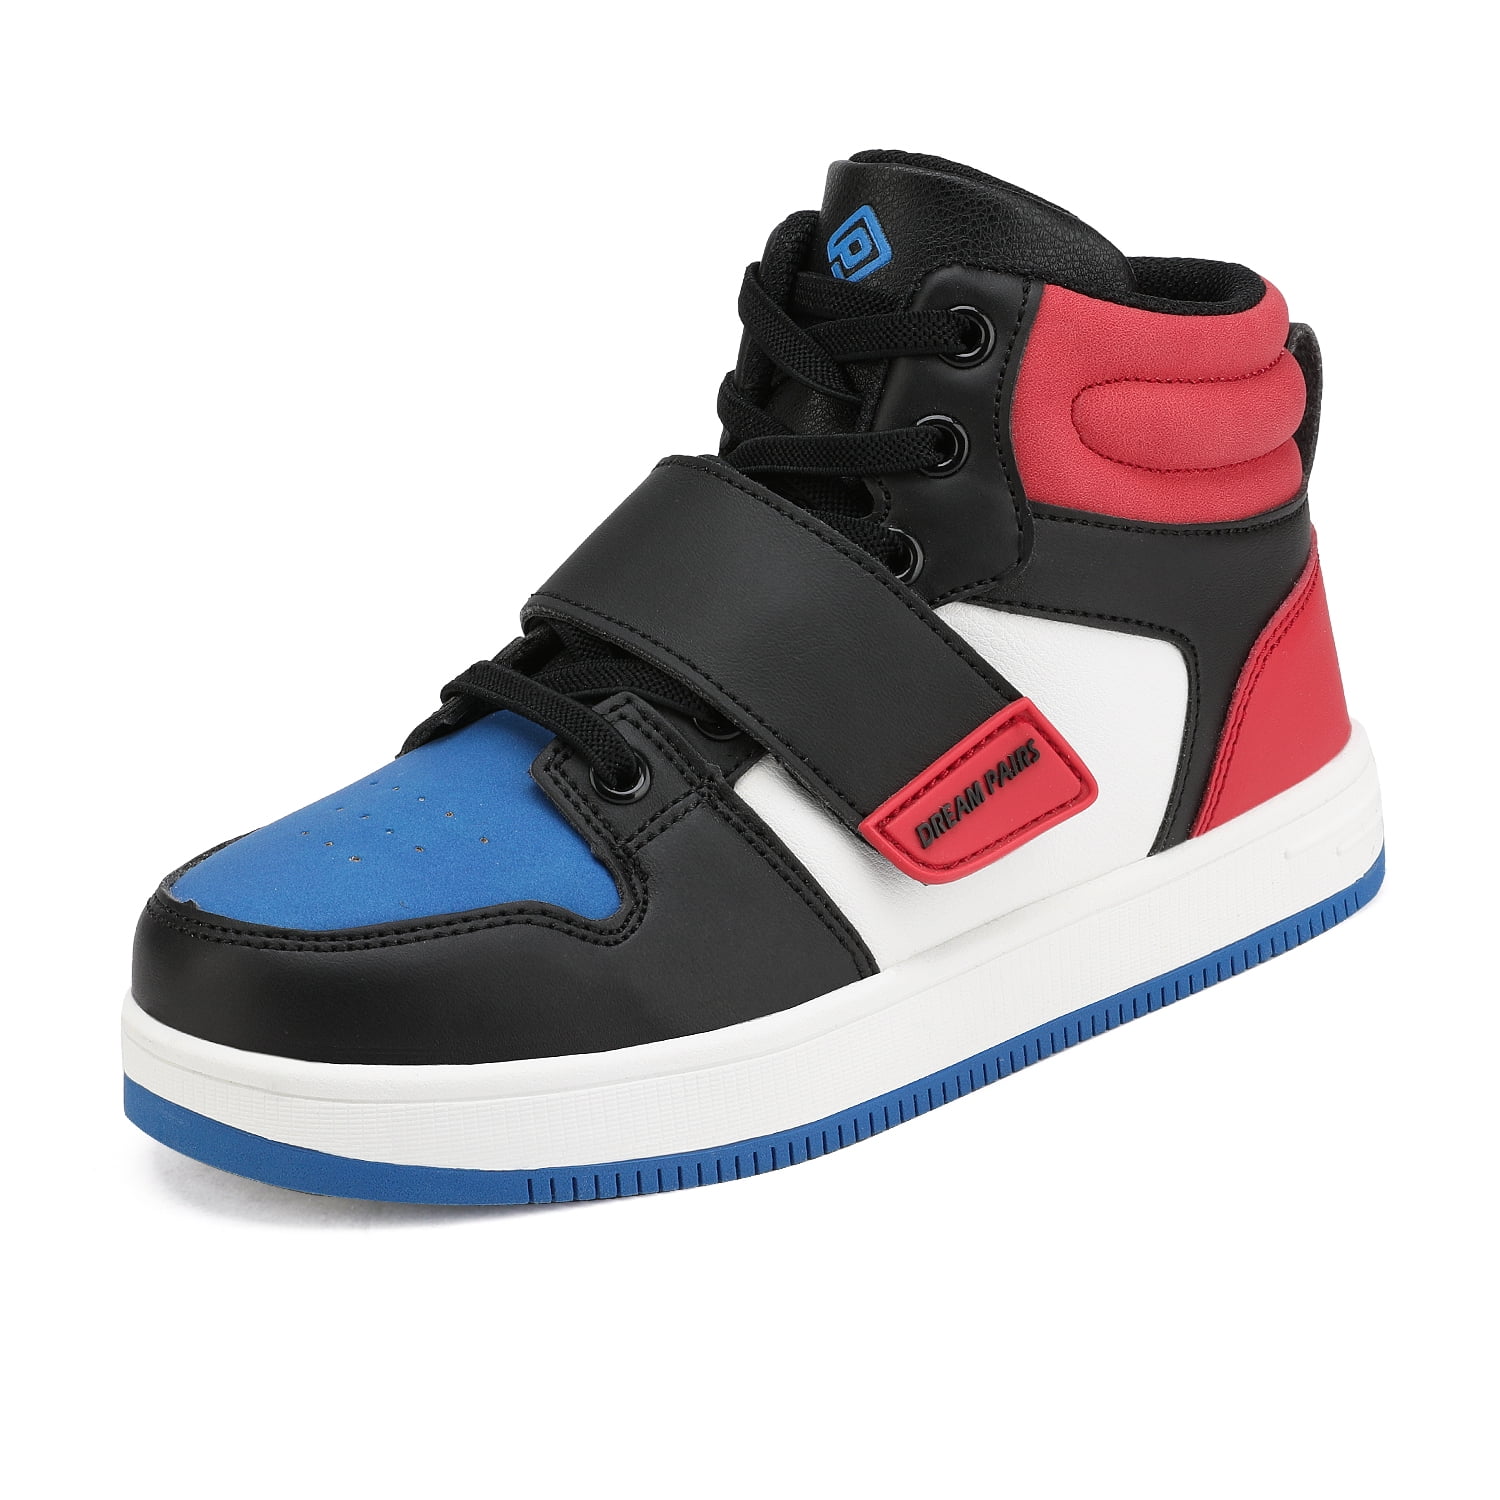 Dream Pairs Boys Girls Red Blue Black High Top Sneaker Shoes Size 9 ...